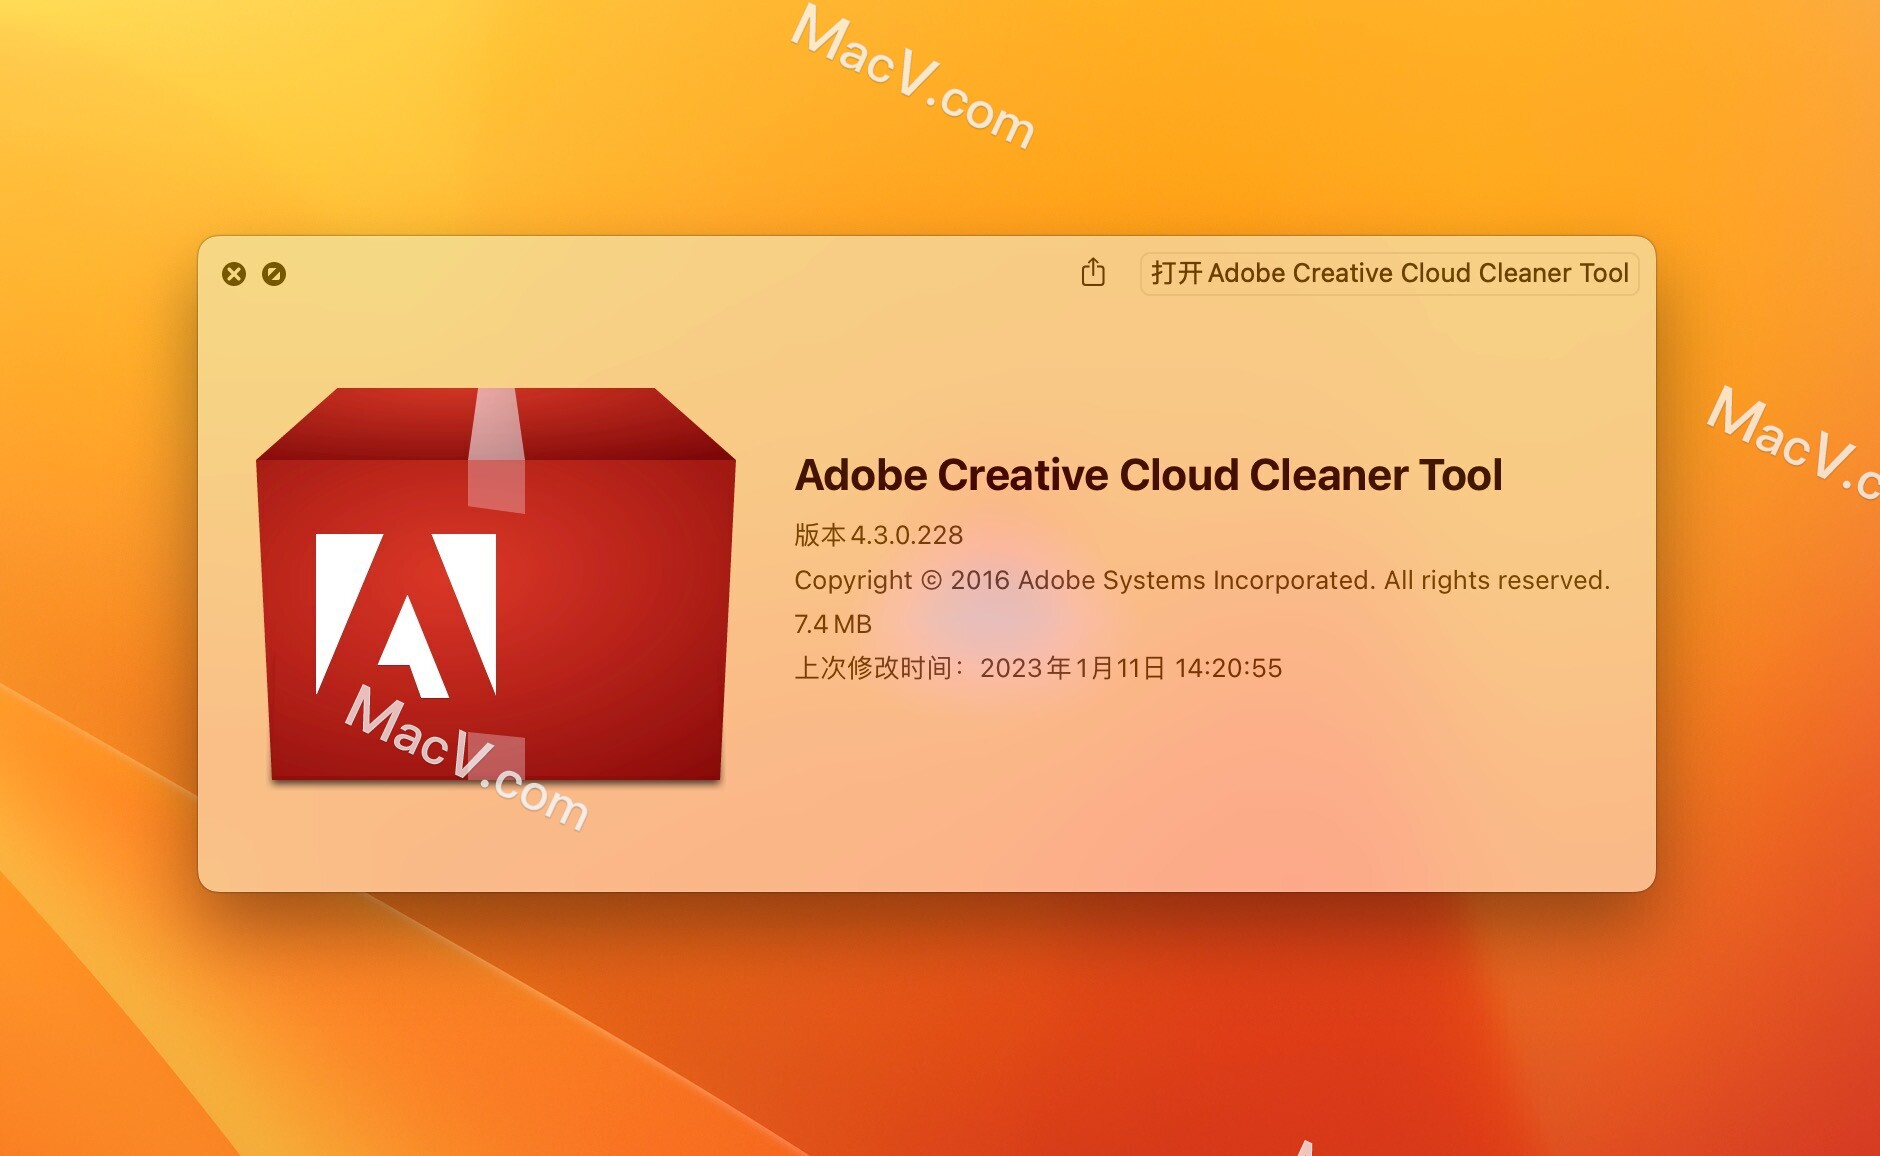 Adobe Creative Cloud Cleaner Tool 4.3.0.395 download the last version for iphone